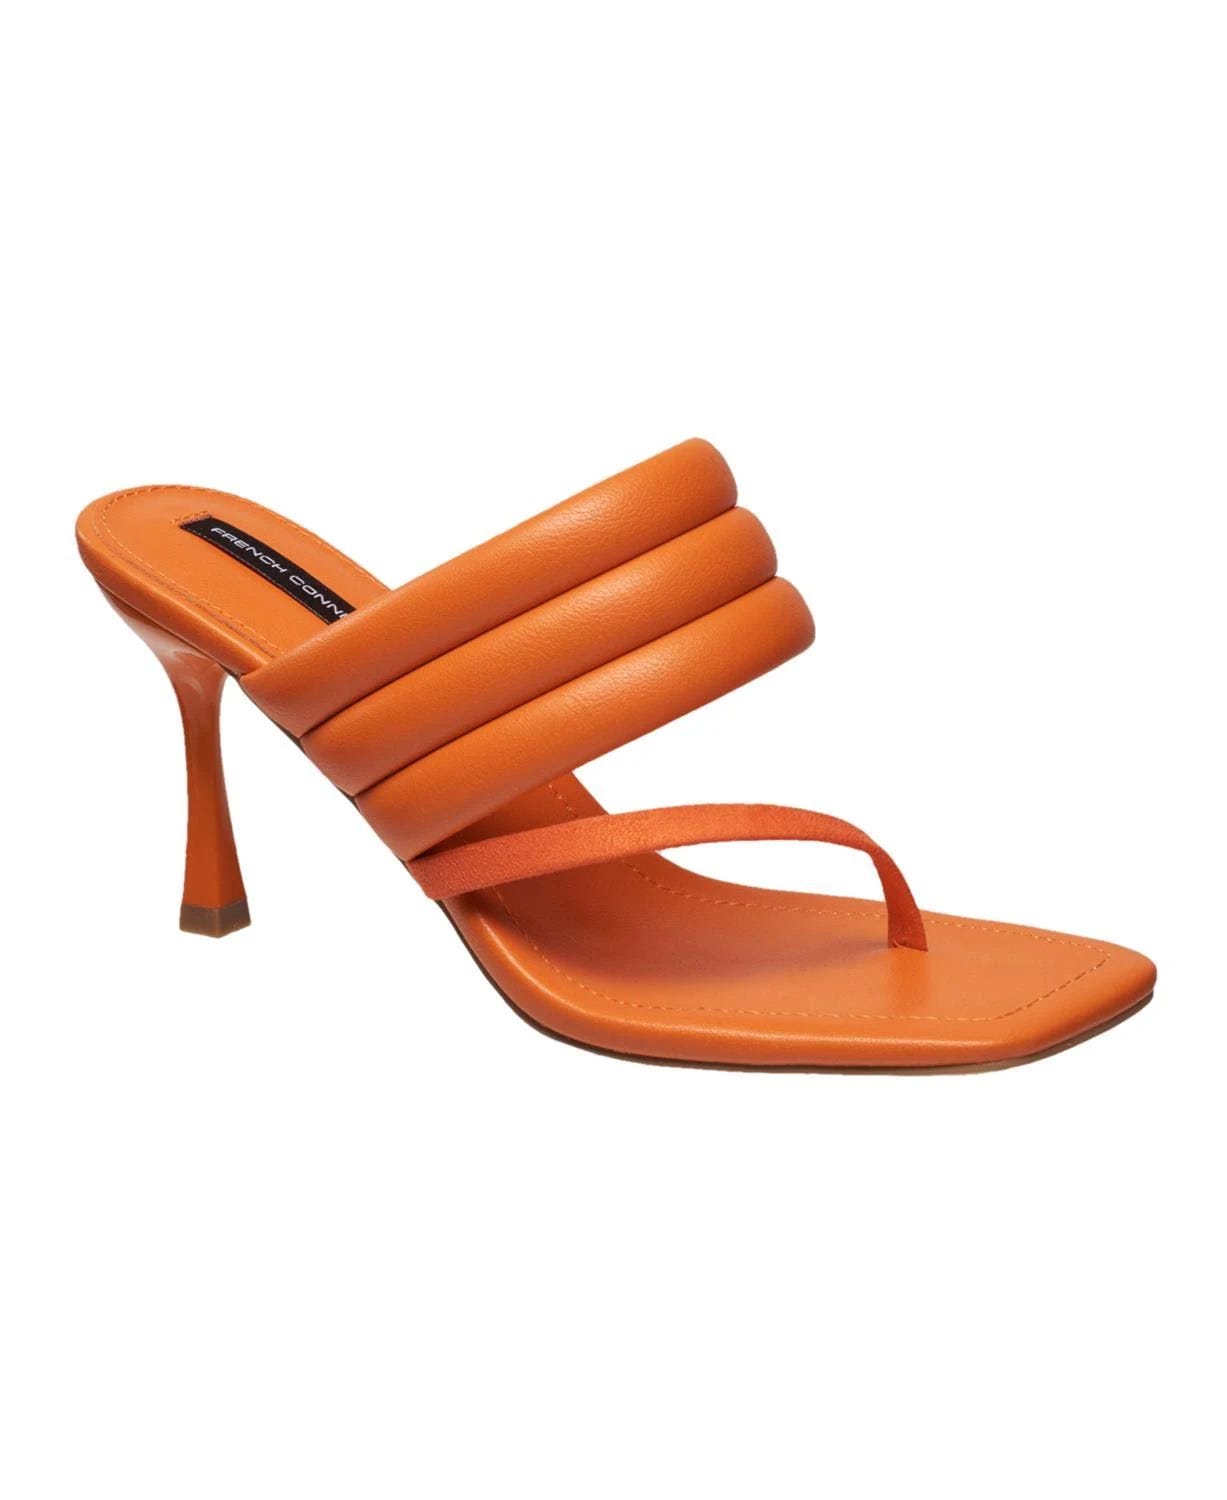 Orange Puffy Stiletto Dress Sandals by French Connection | Image